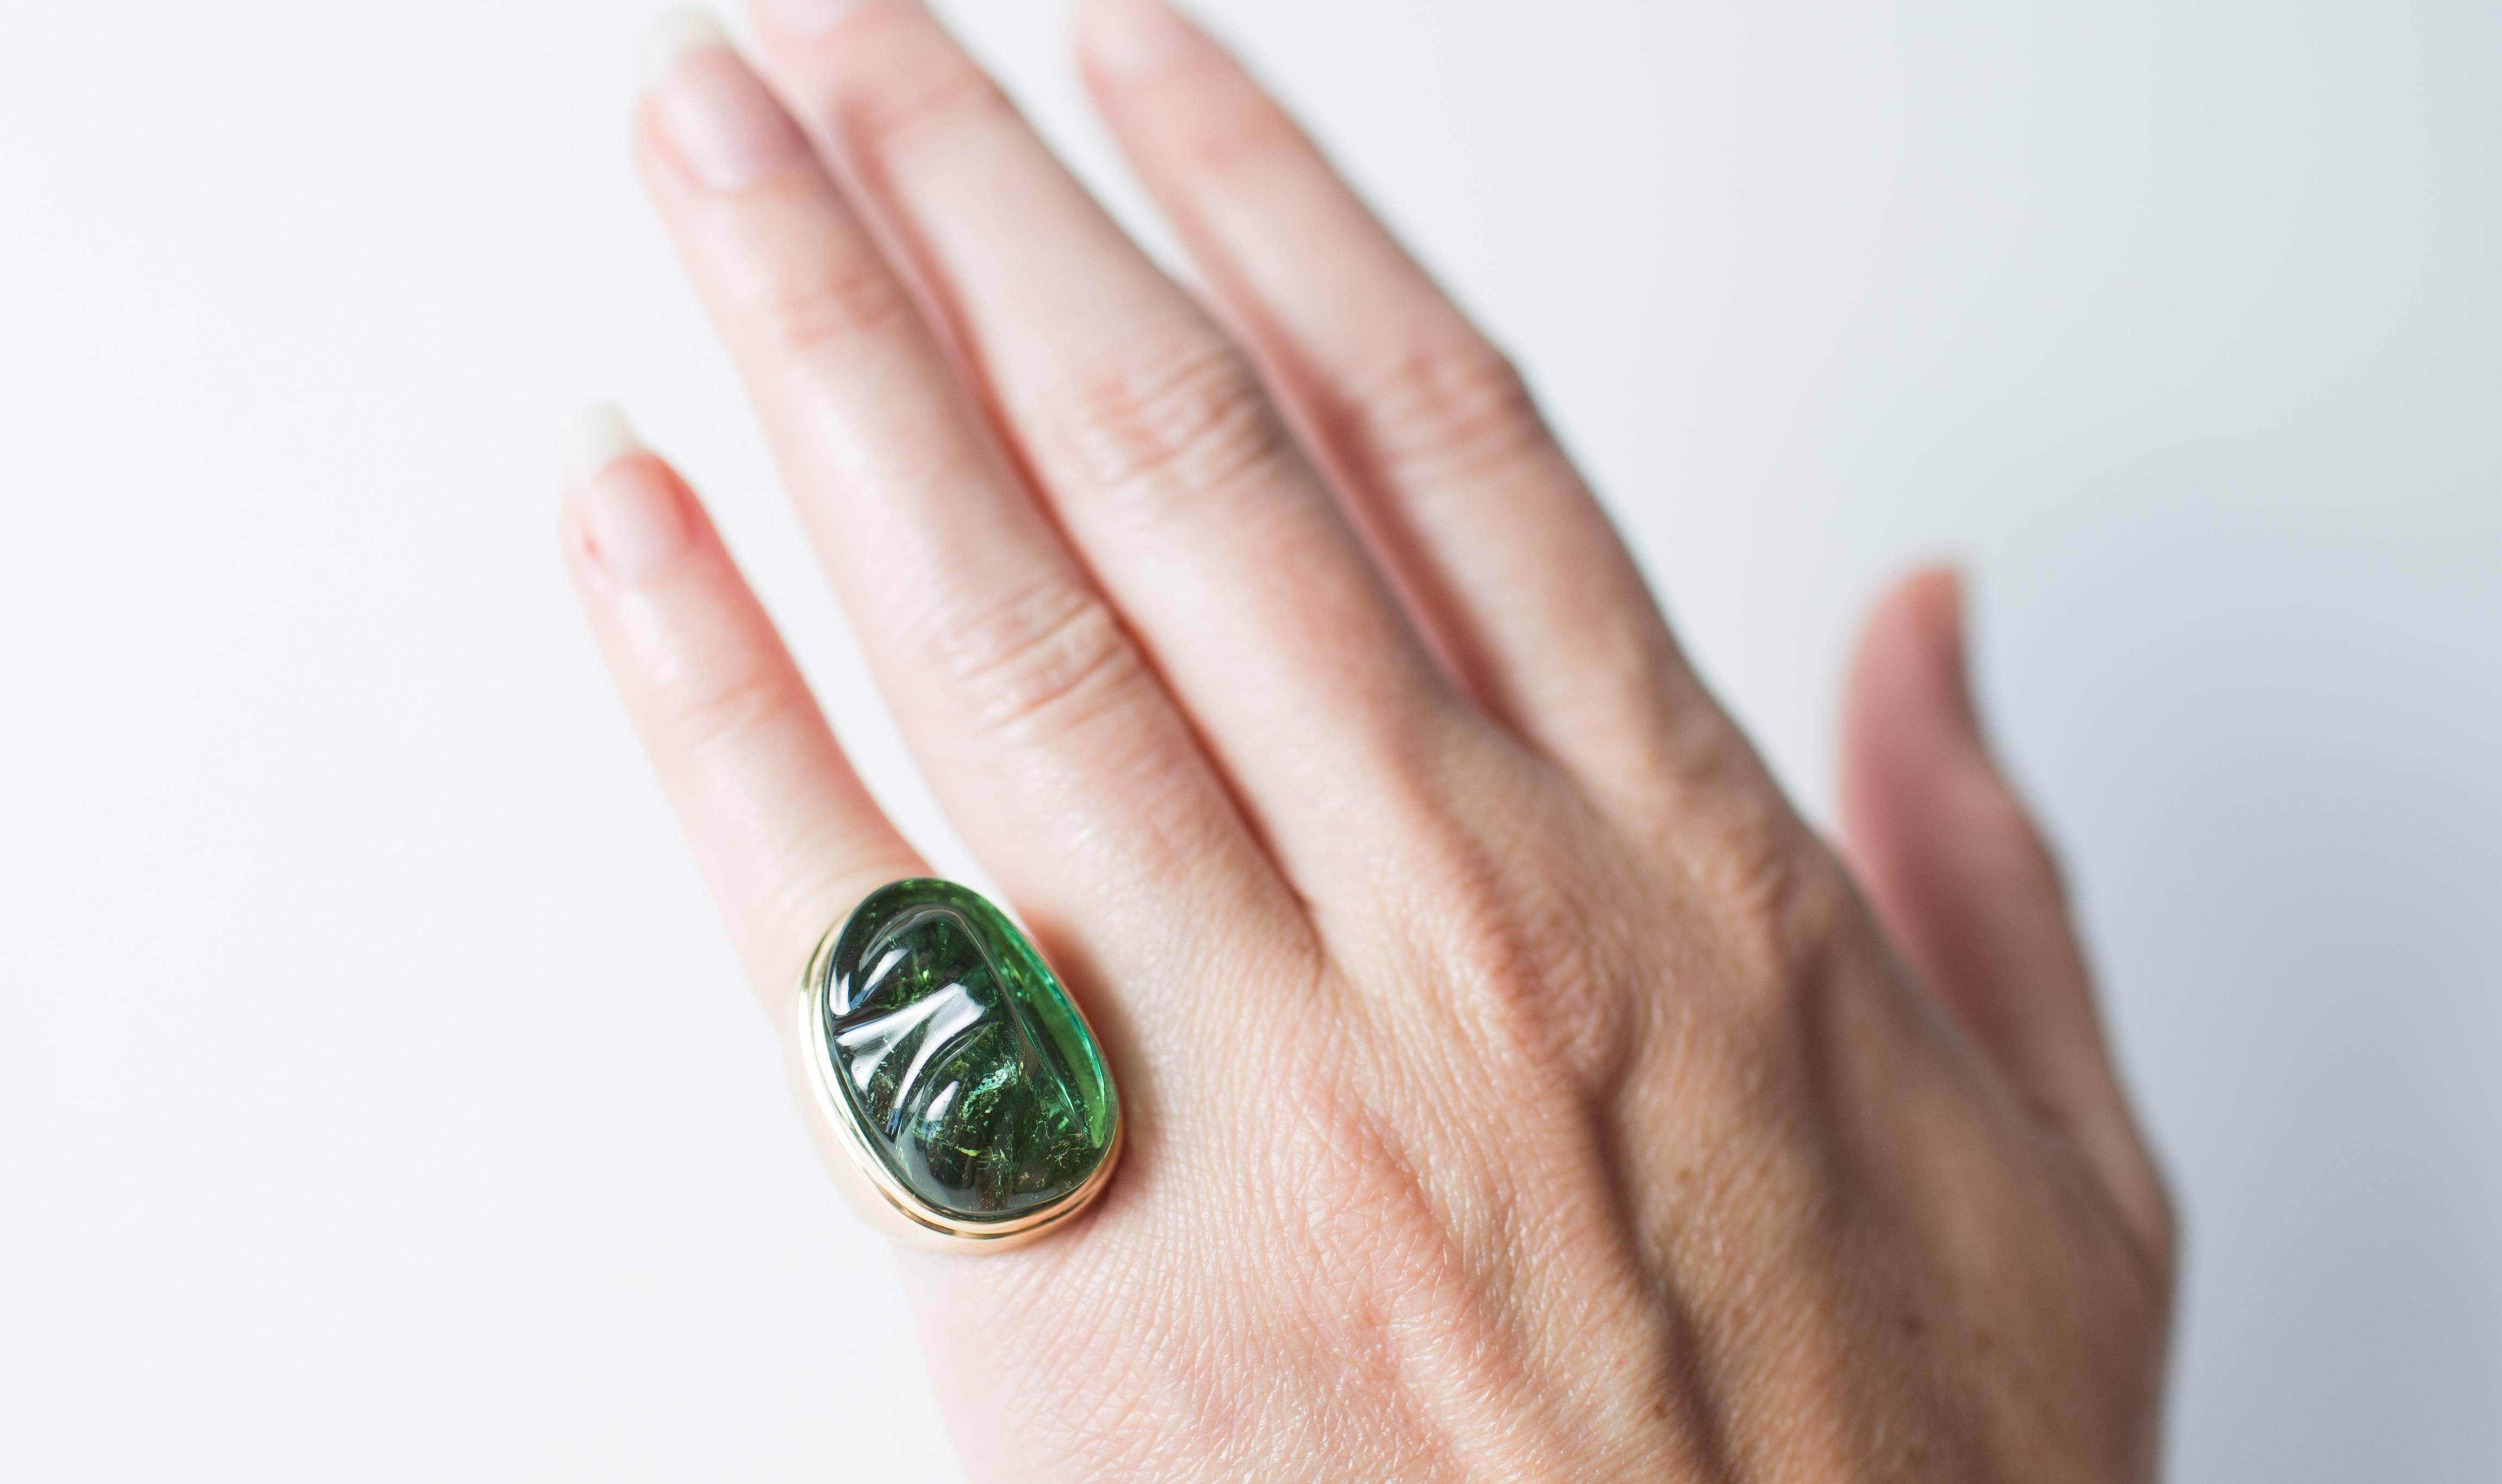 Beautiful  Sculpted Green Tourmaline and 18Kt Yellow Gold Ring by world renowned Brazilian jeweler Haroldo Burle Marx (1911-1991).  The Green Tourmaline is bezel set in brushed 18Kt Yellow Gold.  The Sculpted Green Tourmaline is reminiscent of